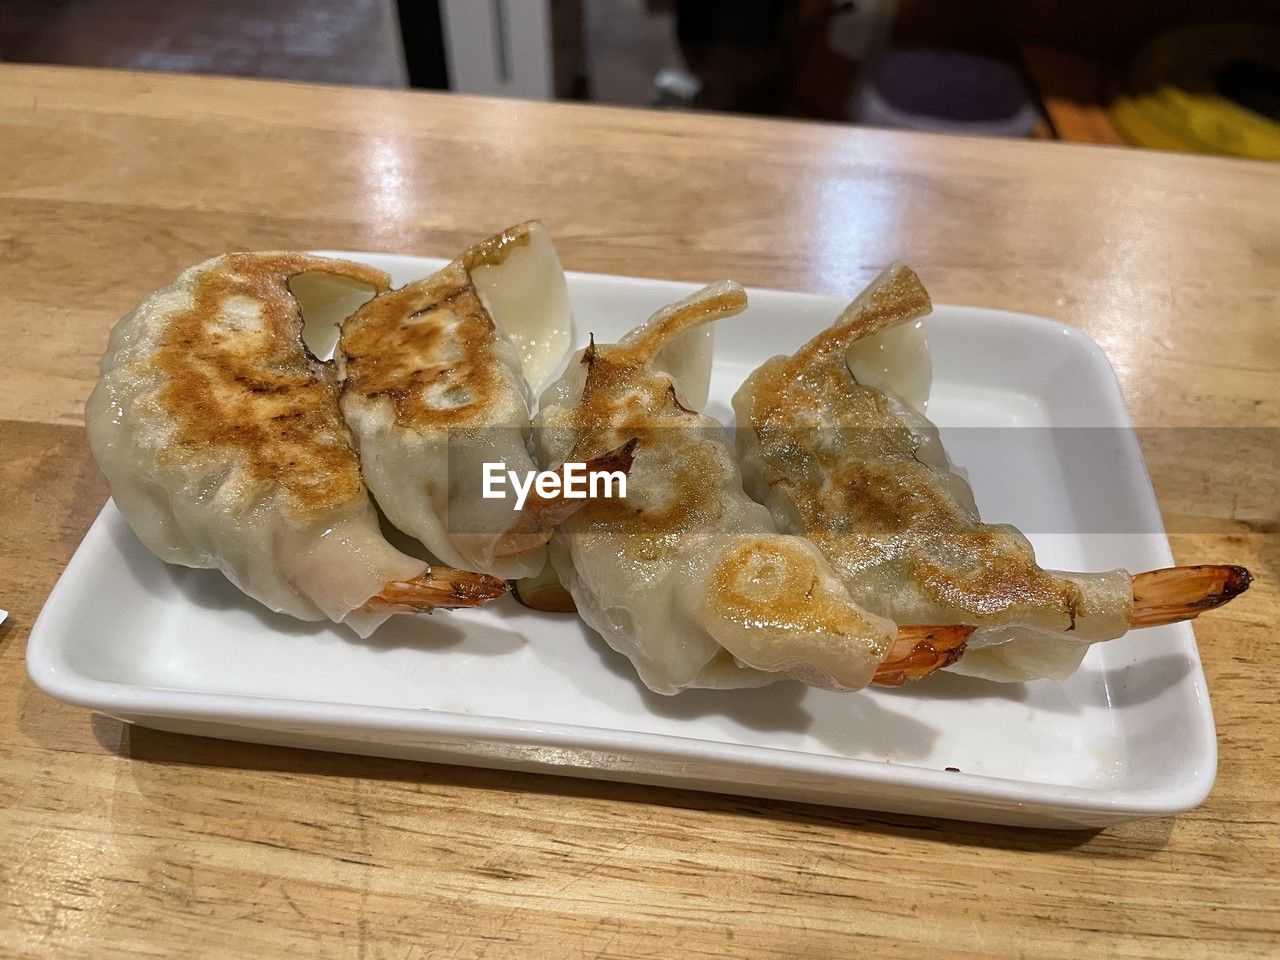 food and drink, food, freshness, table, dish, indoors, plate, meal, no people, cuisine, asian food, close-up, healthy eating, still life, mandu, serving size, fast food, seafood, chinese food, wellbeing, breakfast, wood, dumpling, high angle view, wonton